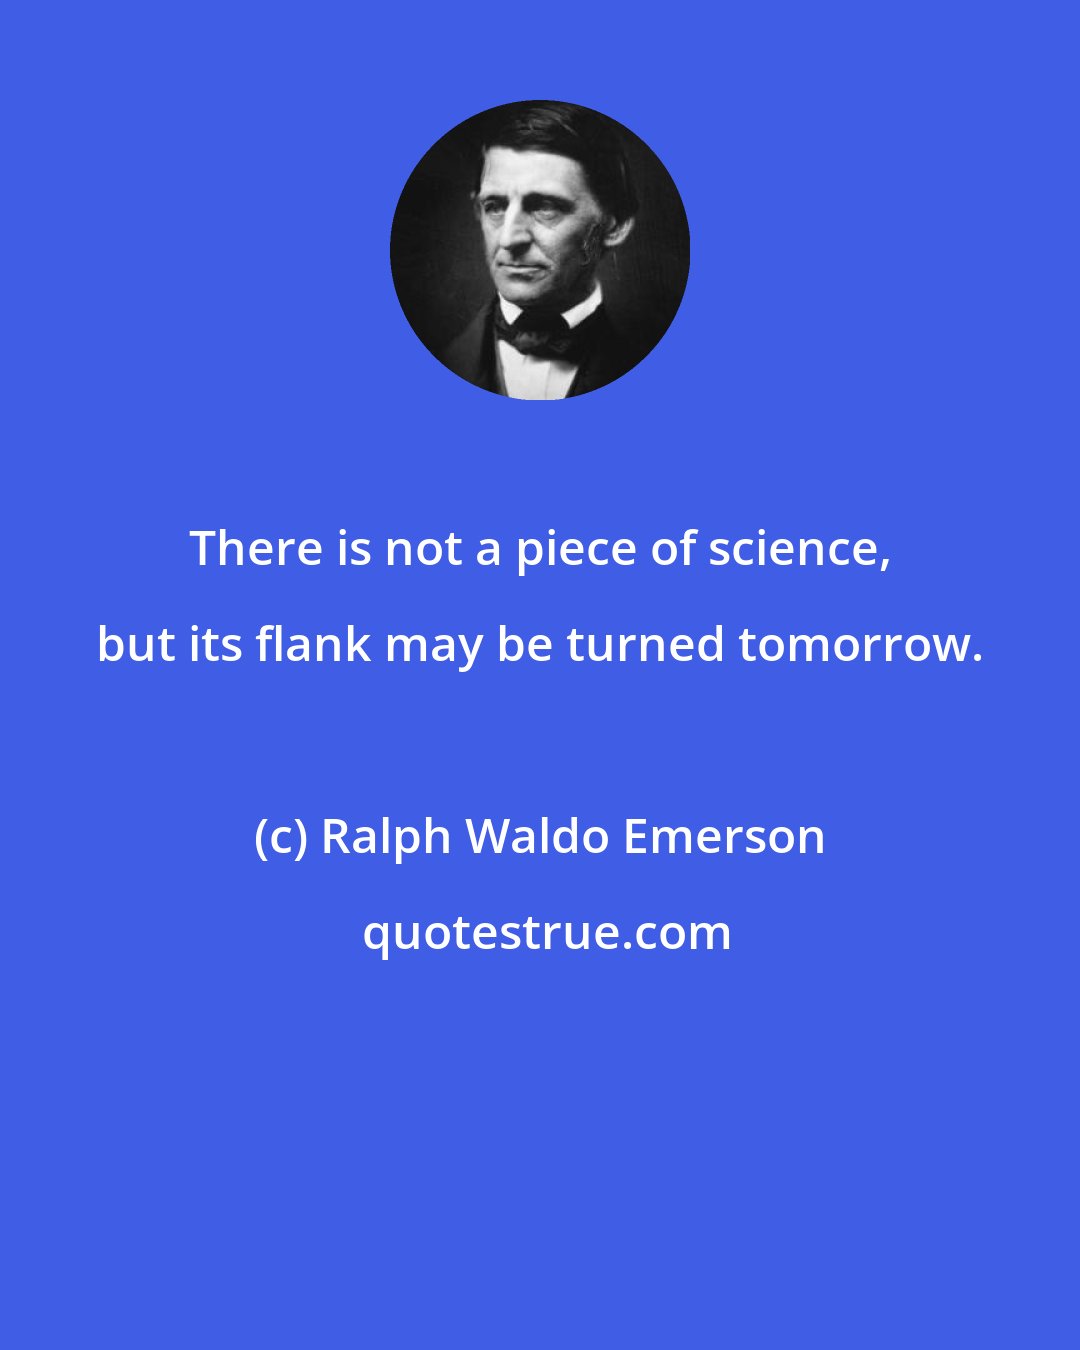 Ralph Waldo Emerson: There is not a piece of science, but its flank may be turned tomorrow.